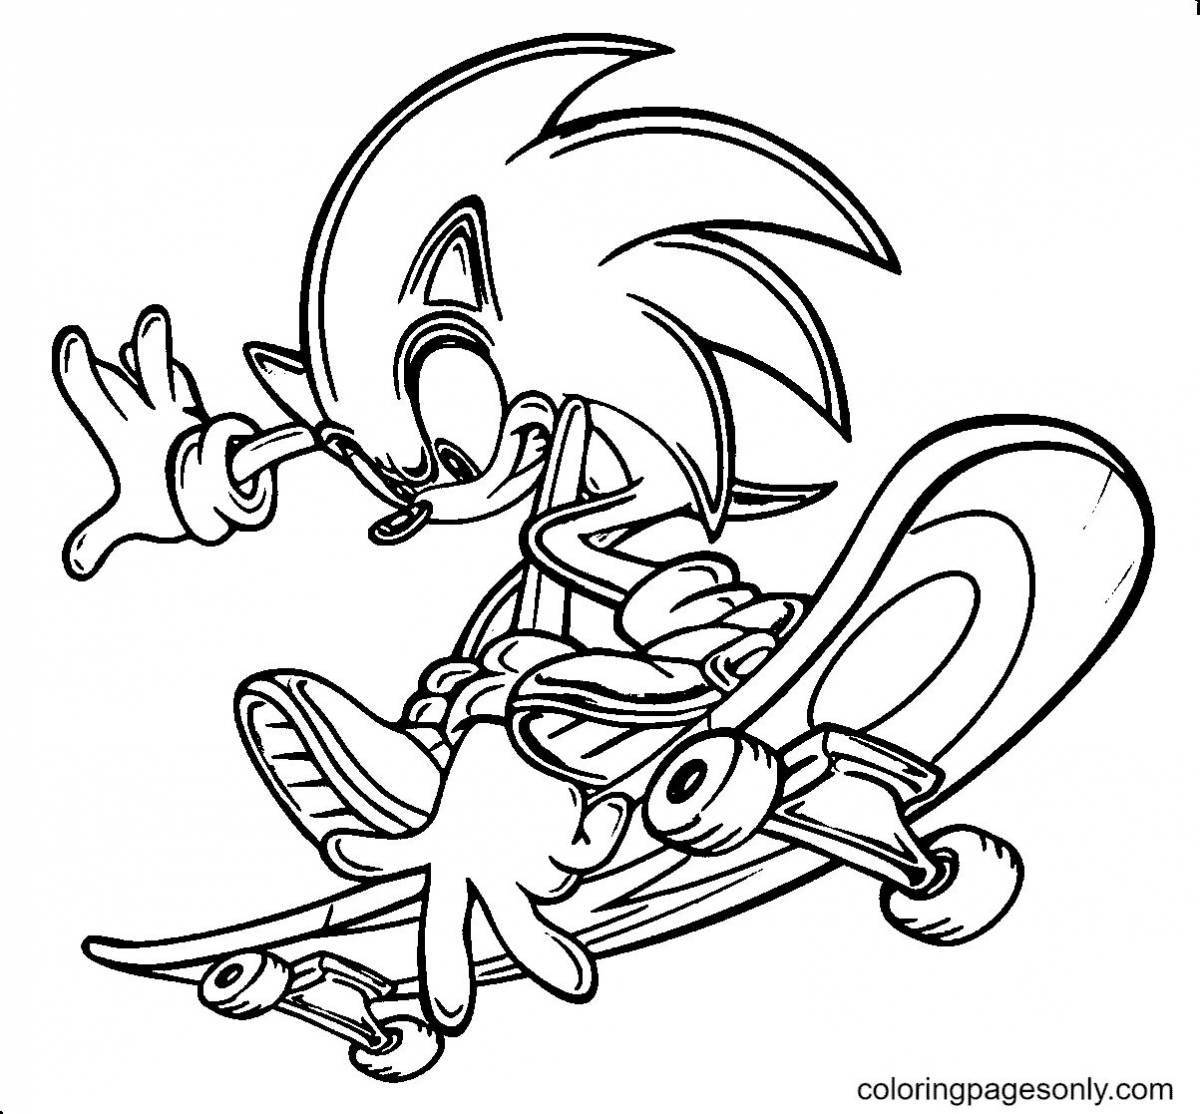 Dazzling coloring sonic new